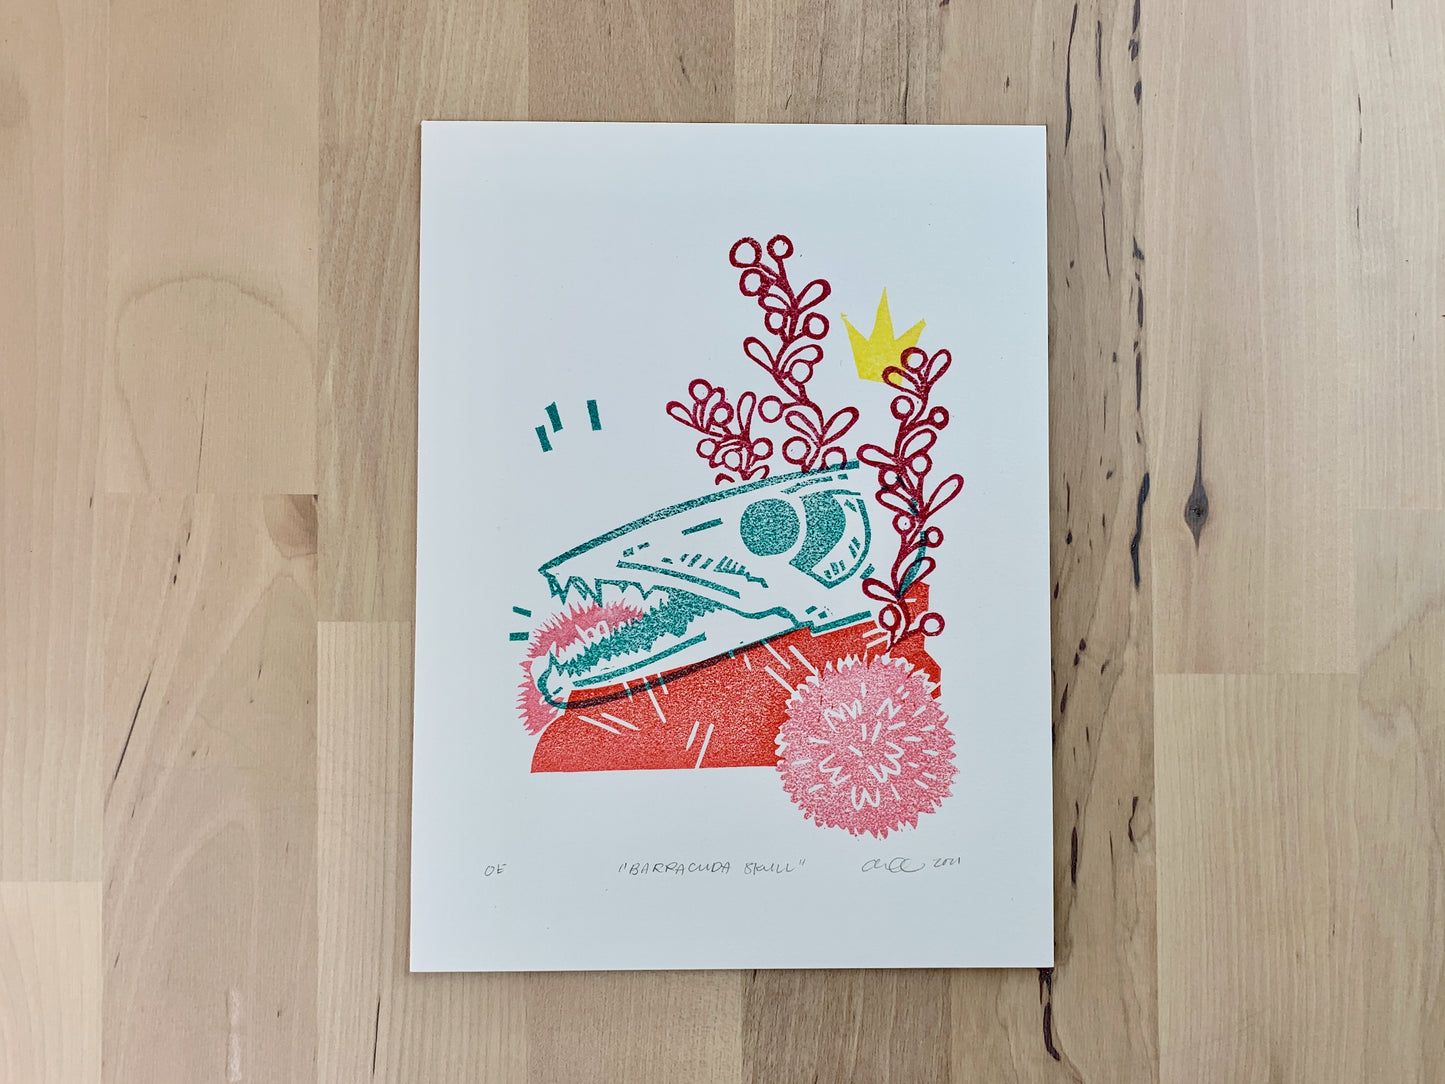 Original art print by Amber Orenstein. A relief print of a barracuda skull with crown and floral accents.